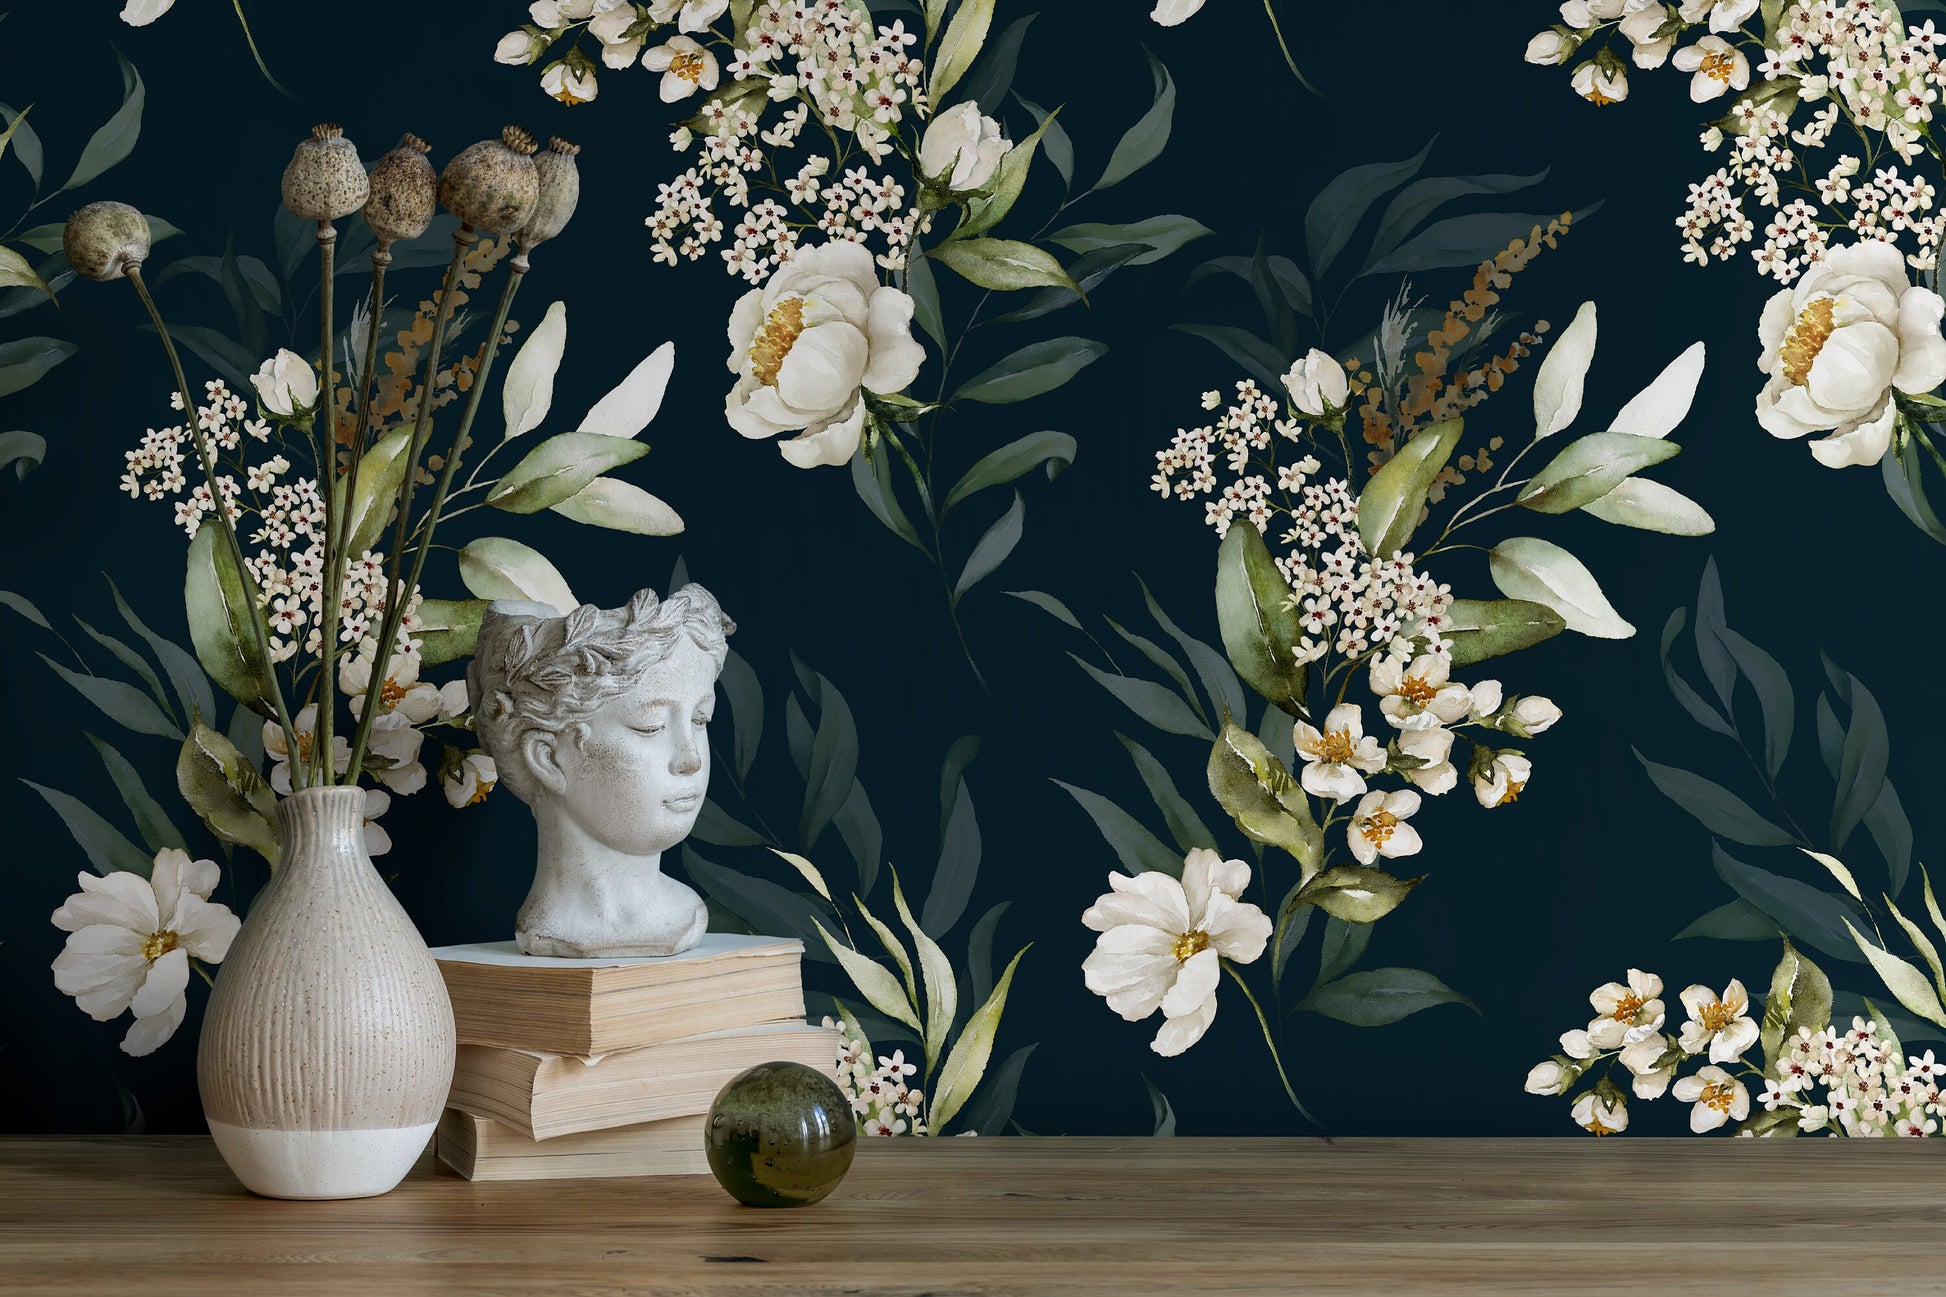 Dark Green Floral Fabric, Wallpaper and Home Decor